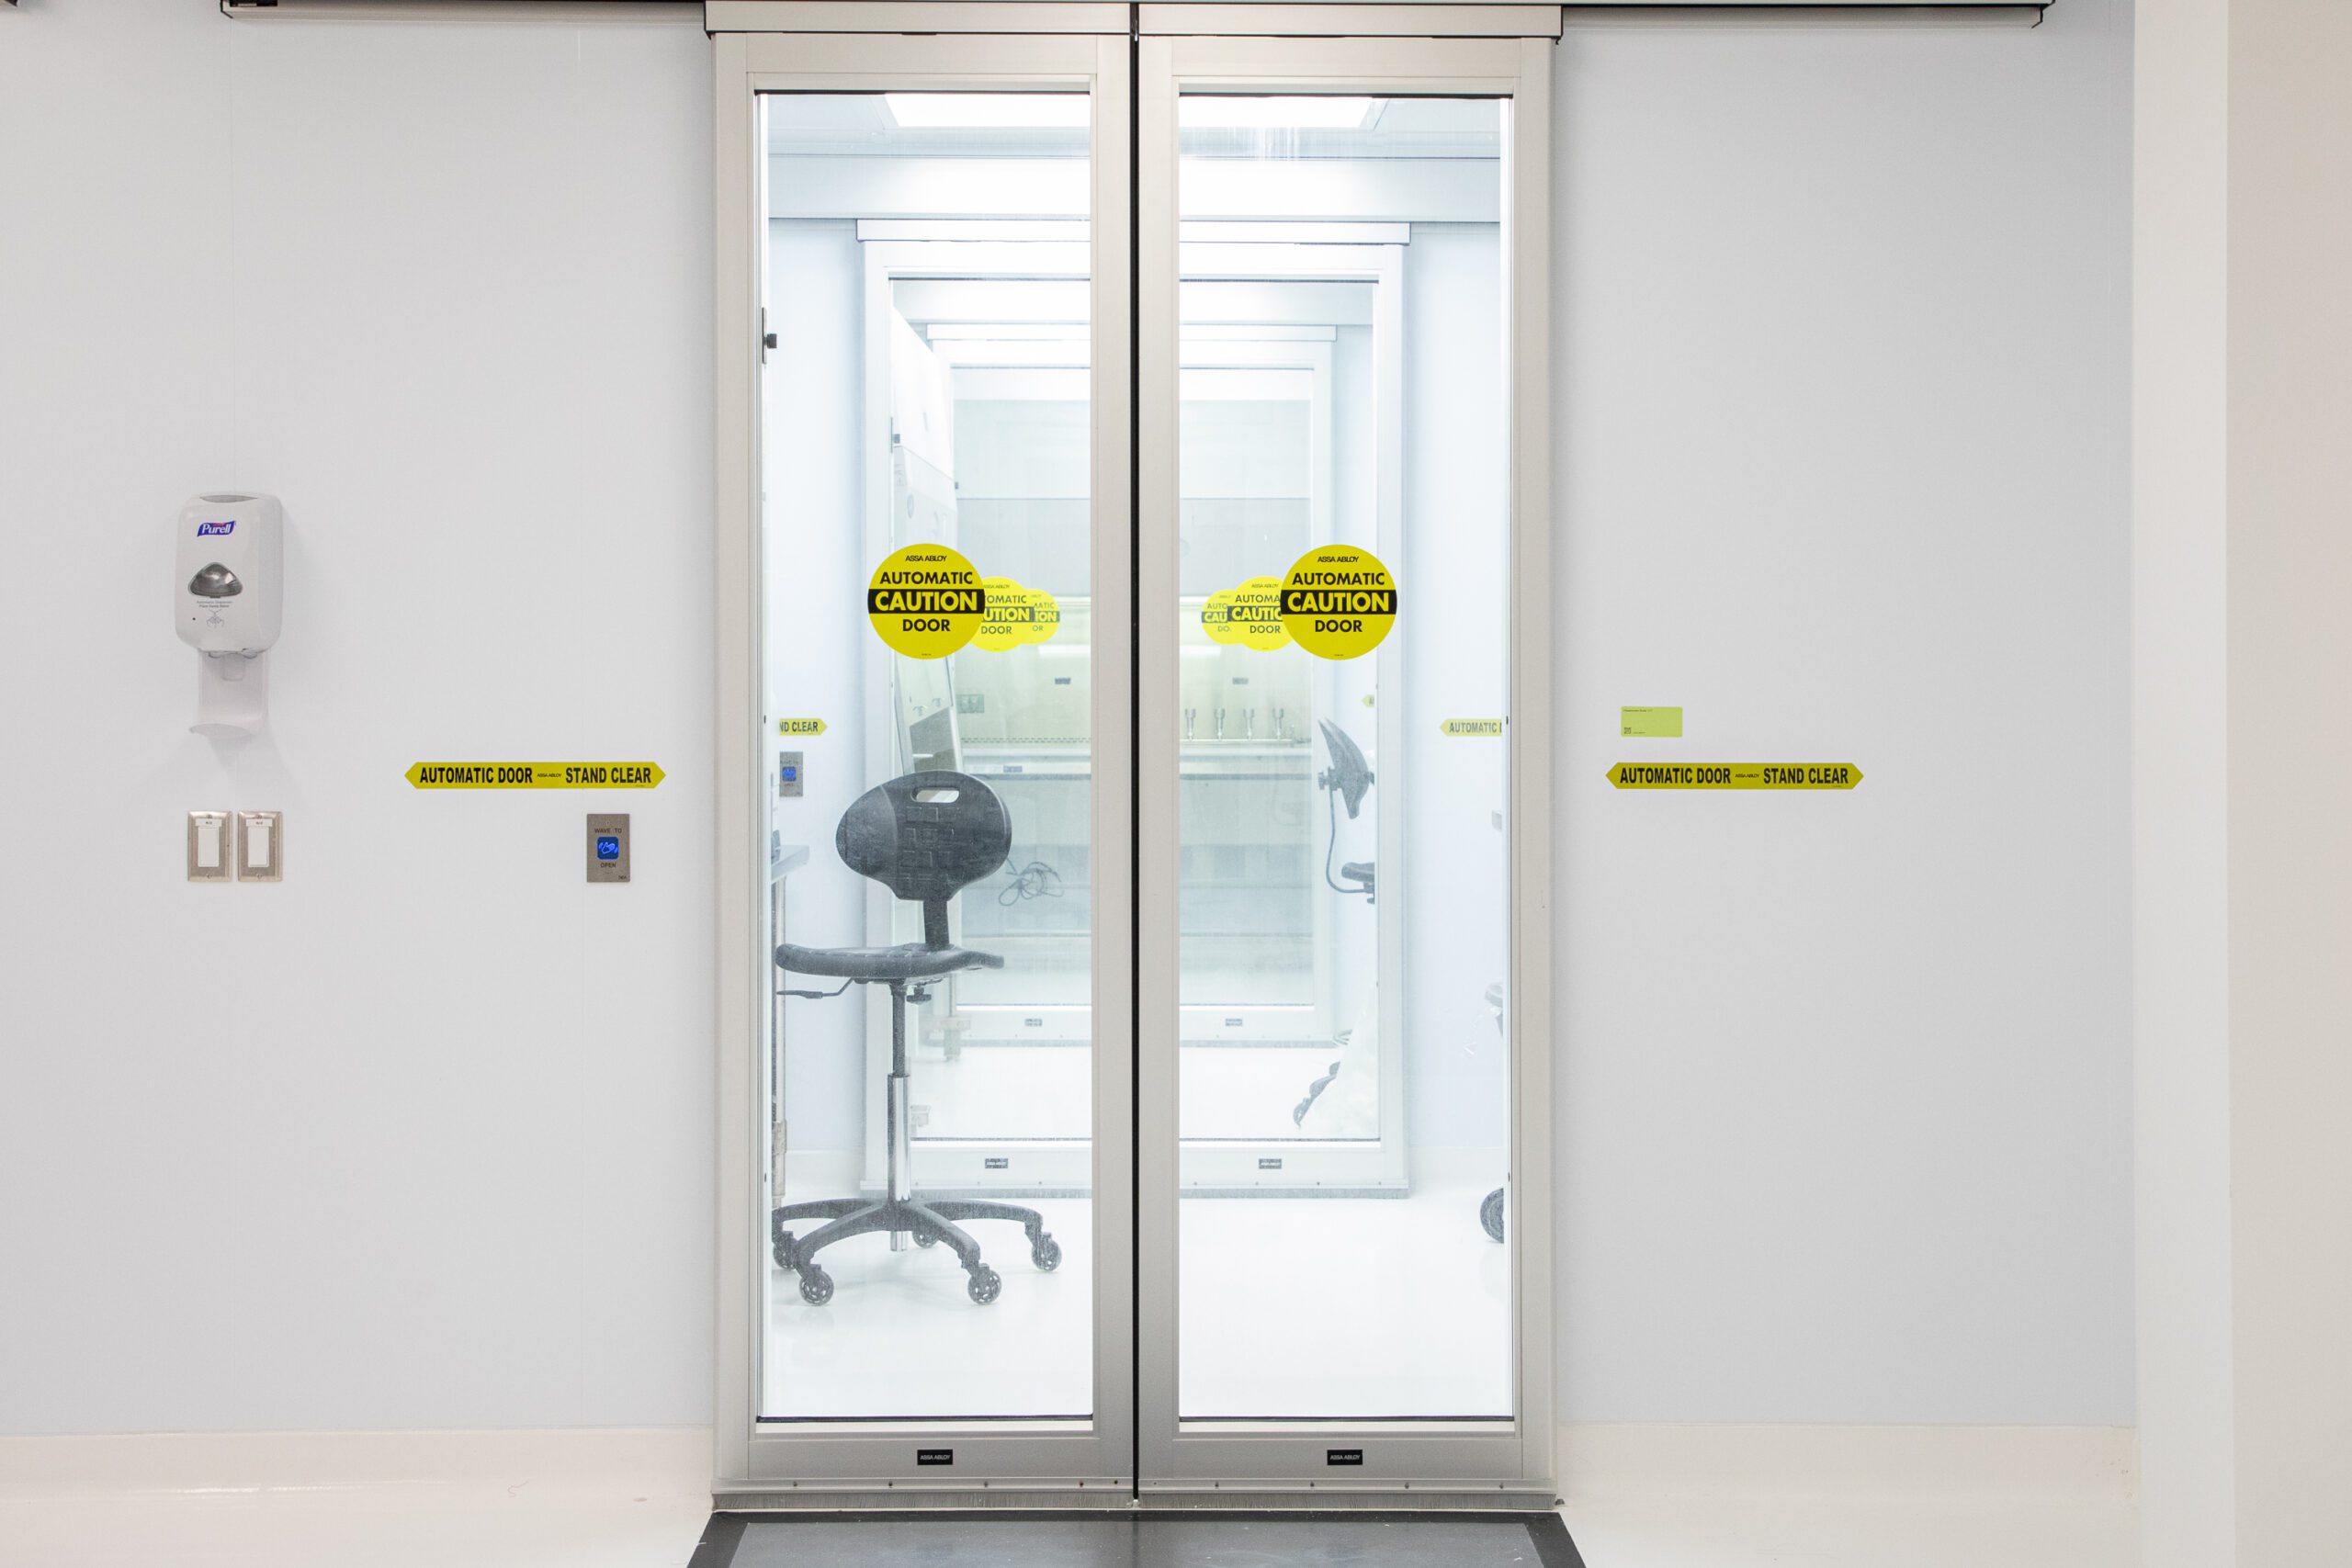 Image of glass doors leading to Eagle's Microbiology laboratory cleanroom